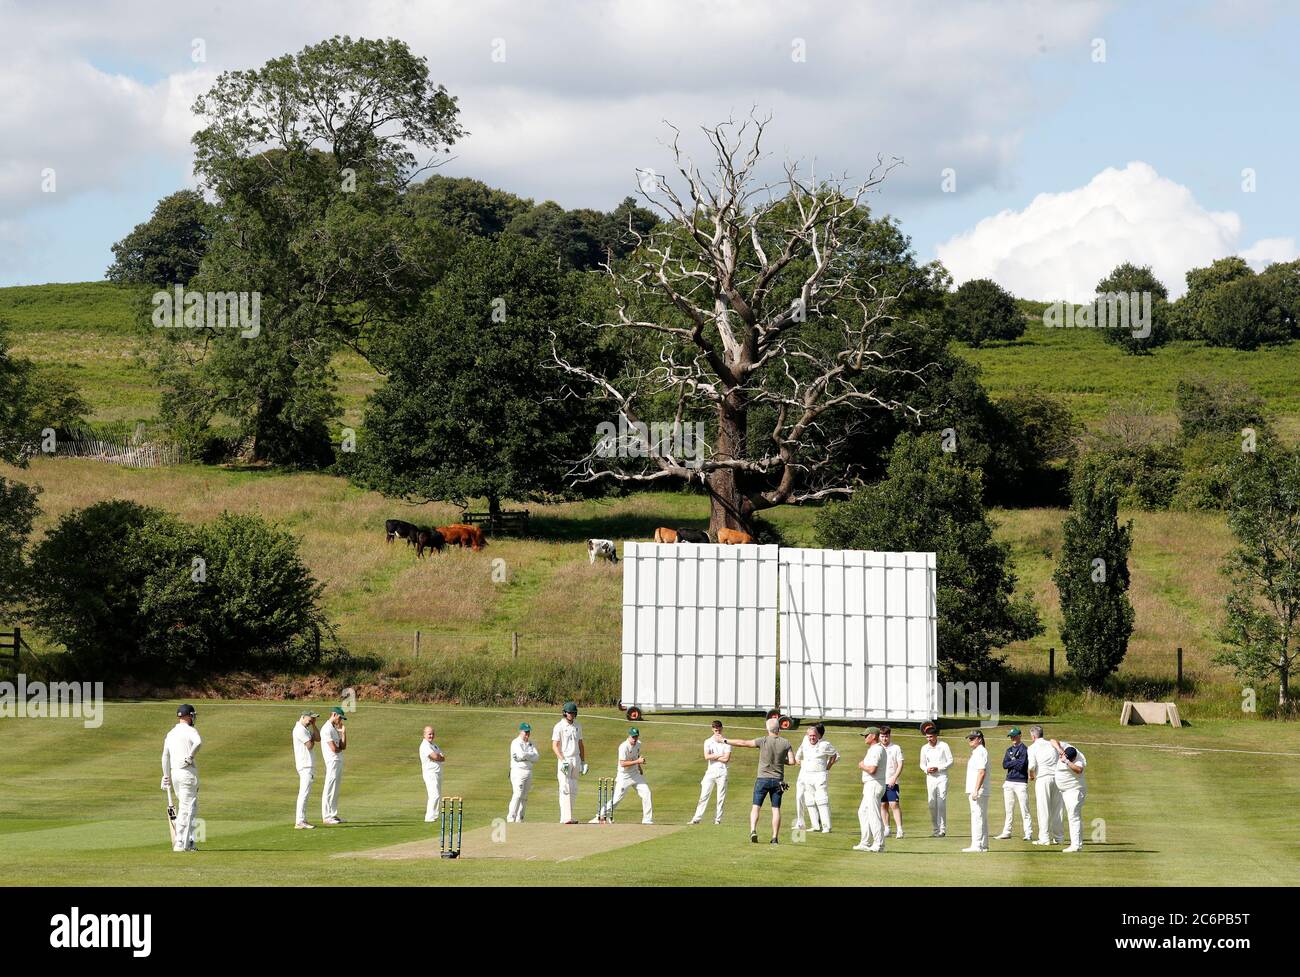 Newtown Linford, Leicestershire, UK. 11th July 2020. Players of Newtown Linford and Oakham cricket clubs listen to a covid-19 briefing before play after the UK government relaxed coronavirus pandemic lockdown restrictions for several outdoor activities. Credit Darren Staples/Alamy Live News. Stock Photo